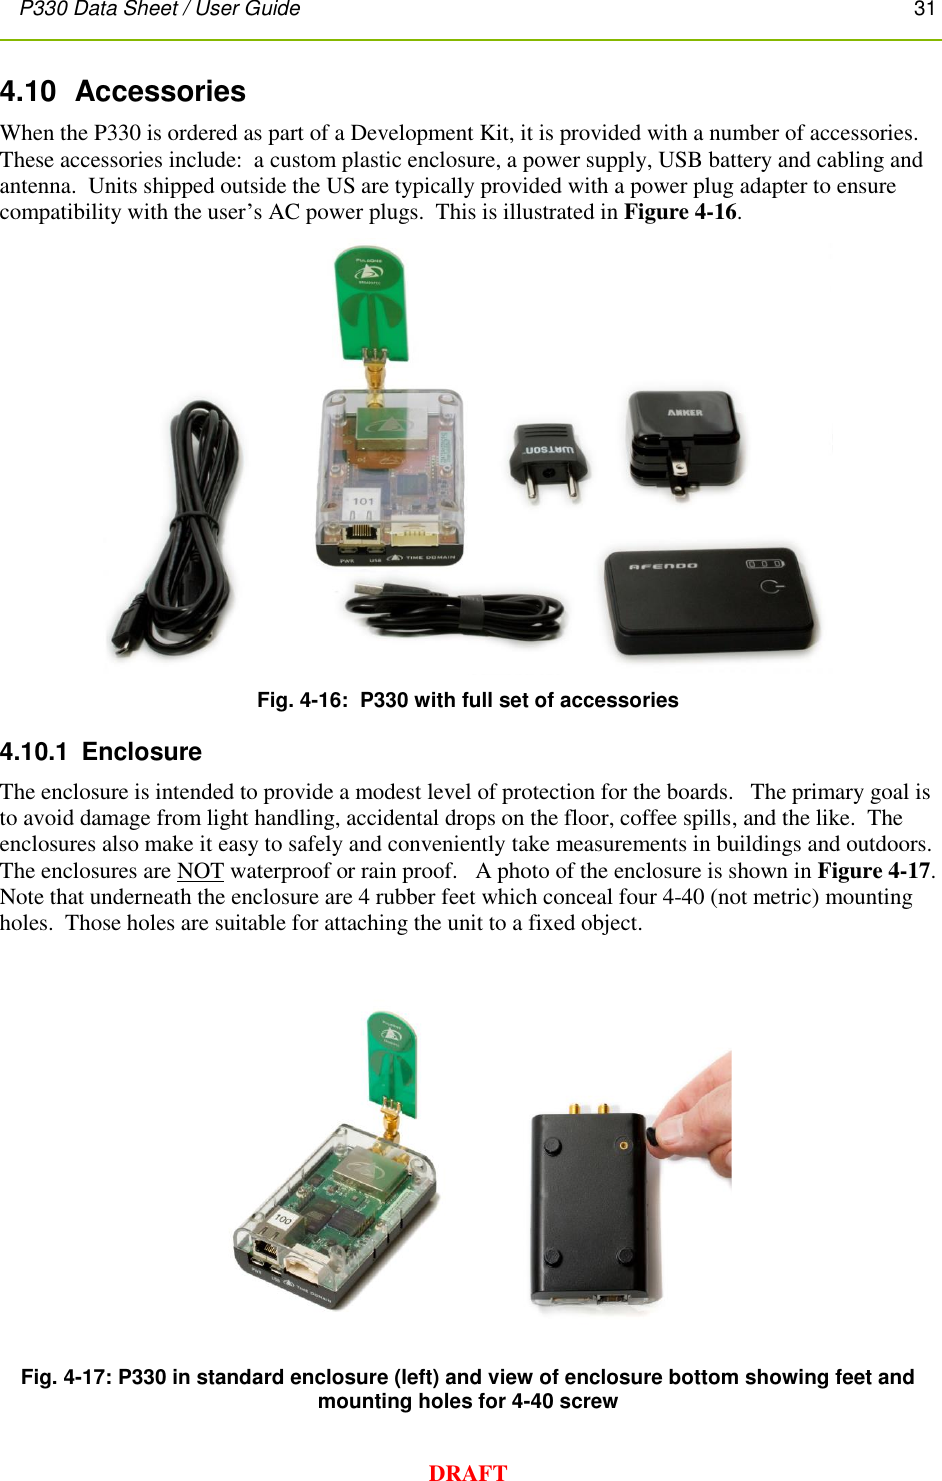 P330 Data Sheet / User Guide       31        DRAFT 4.10  Accessories When the P330 is ordered as part of a Development Kit, it is provided with a number of accessories.  These accessories include:  a custom plastic enclosure, a power supply, USB battery and cabling and antenna.  Units shipped outside the US are typically provided with a power plug adapter to ensure compatibility with the user’s AC power plugs.  This is illustrated in Figure 4-16.  Fig. 4-16:  P330 with full set of accessories 4.10.1  Enclosure The enclosure is intended to provide a modest level of protection for the boards.   The primary goal is to avoid damage from light handling, accidental drops on the floor, coffee spills, and the like.  The enclosures also make it easy to safely and conveniently take measurements in buildings and outdoors.  The enclosures are NOT waterproof or rain proof.   A photo of the enclosure is shown in Figure 4-17.   Note that underneath the enclosure are 4 rubber feet which conceal four 4-40 (not metric) mounting holes.  Those holes are suitable for attaching the unit to a fixed object.   Fig. 4-17: P330 in standard enclosure (left) and view of enclosure bottom showing feet and mounting holes for 4-40 screw 